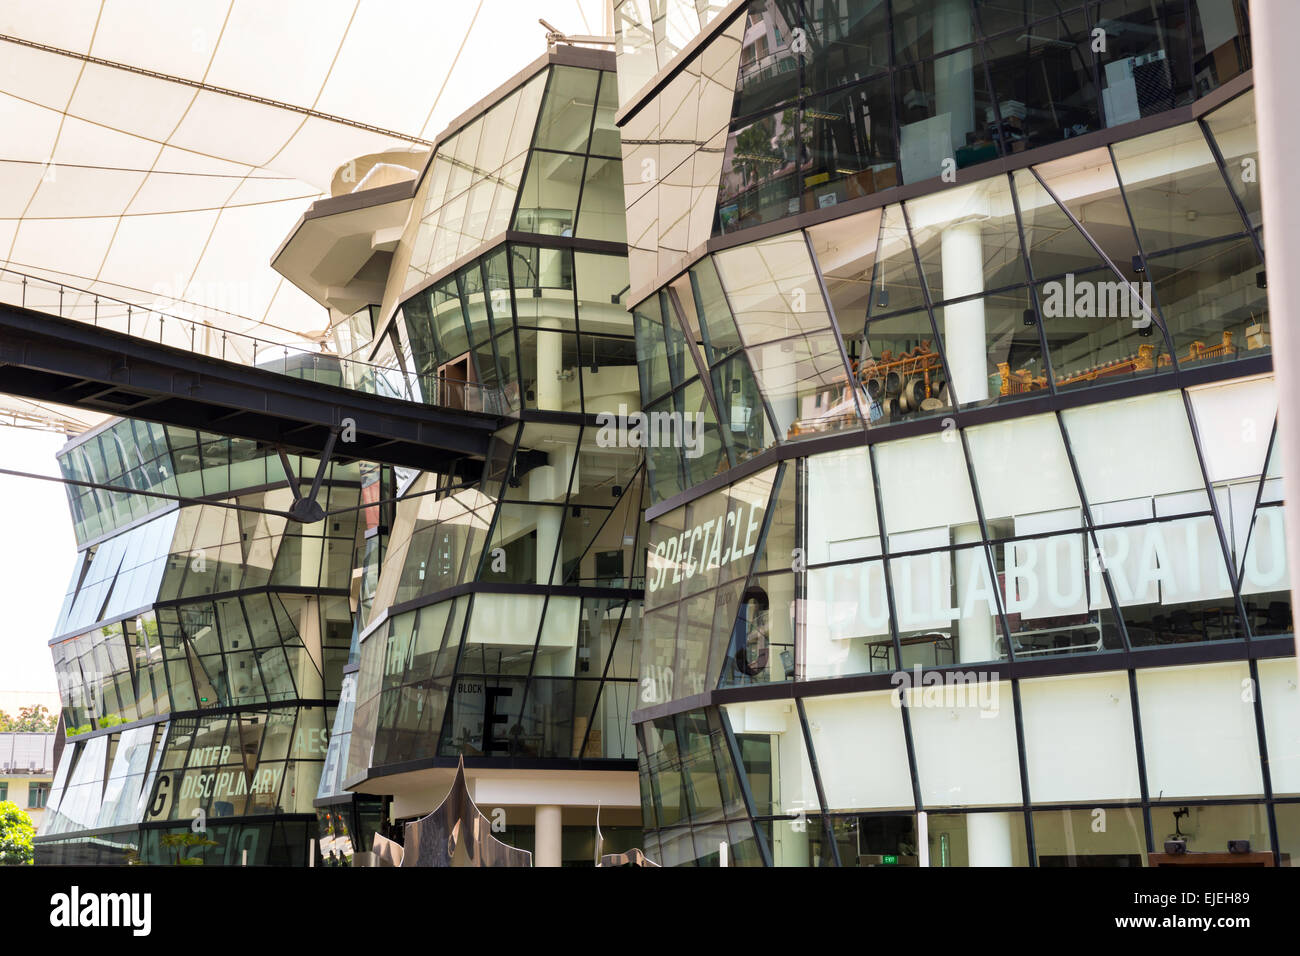 Singapore - FEB 15: Architecture of  Lasalle College building on FEB 15, 2014. This is one of the most popular Art Collage in Si Stock Photo